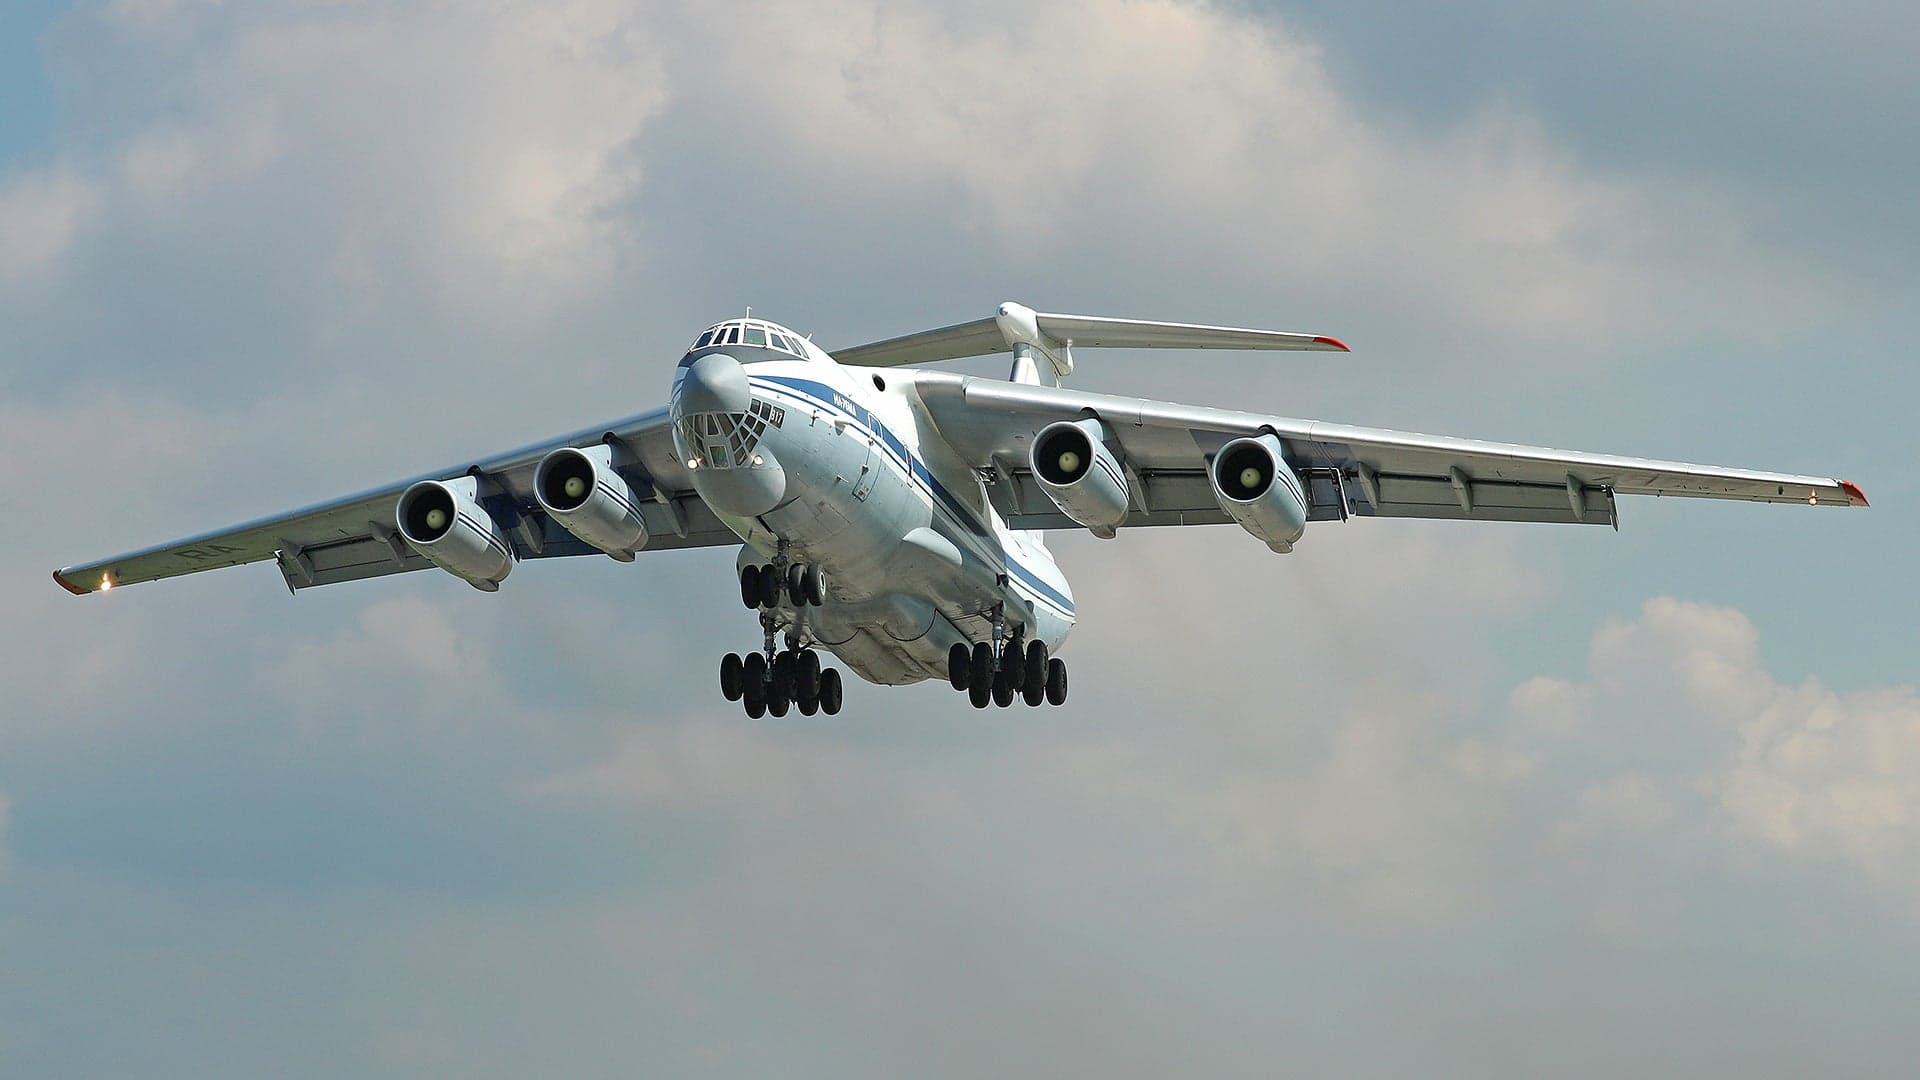 Ukraine Claims It Shot Down A Russian IL-76 Transport Plane (Updated)